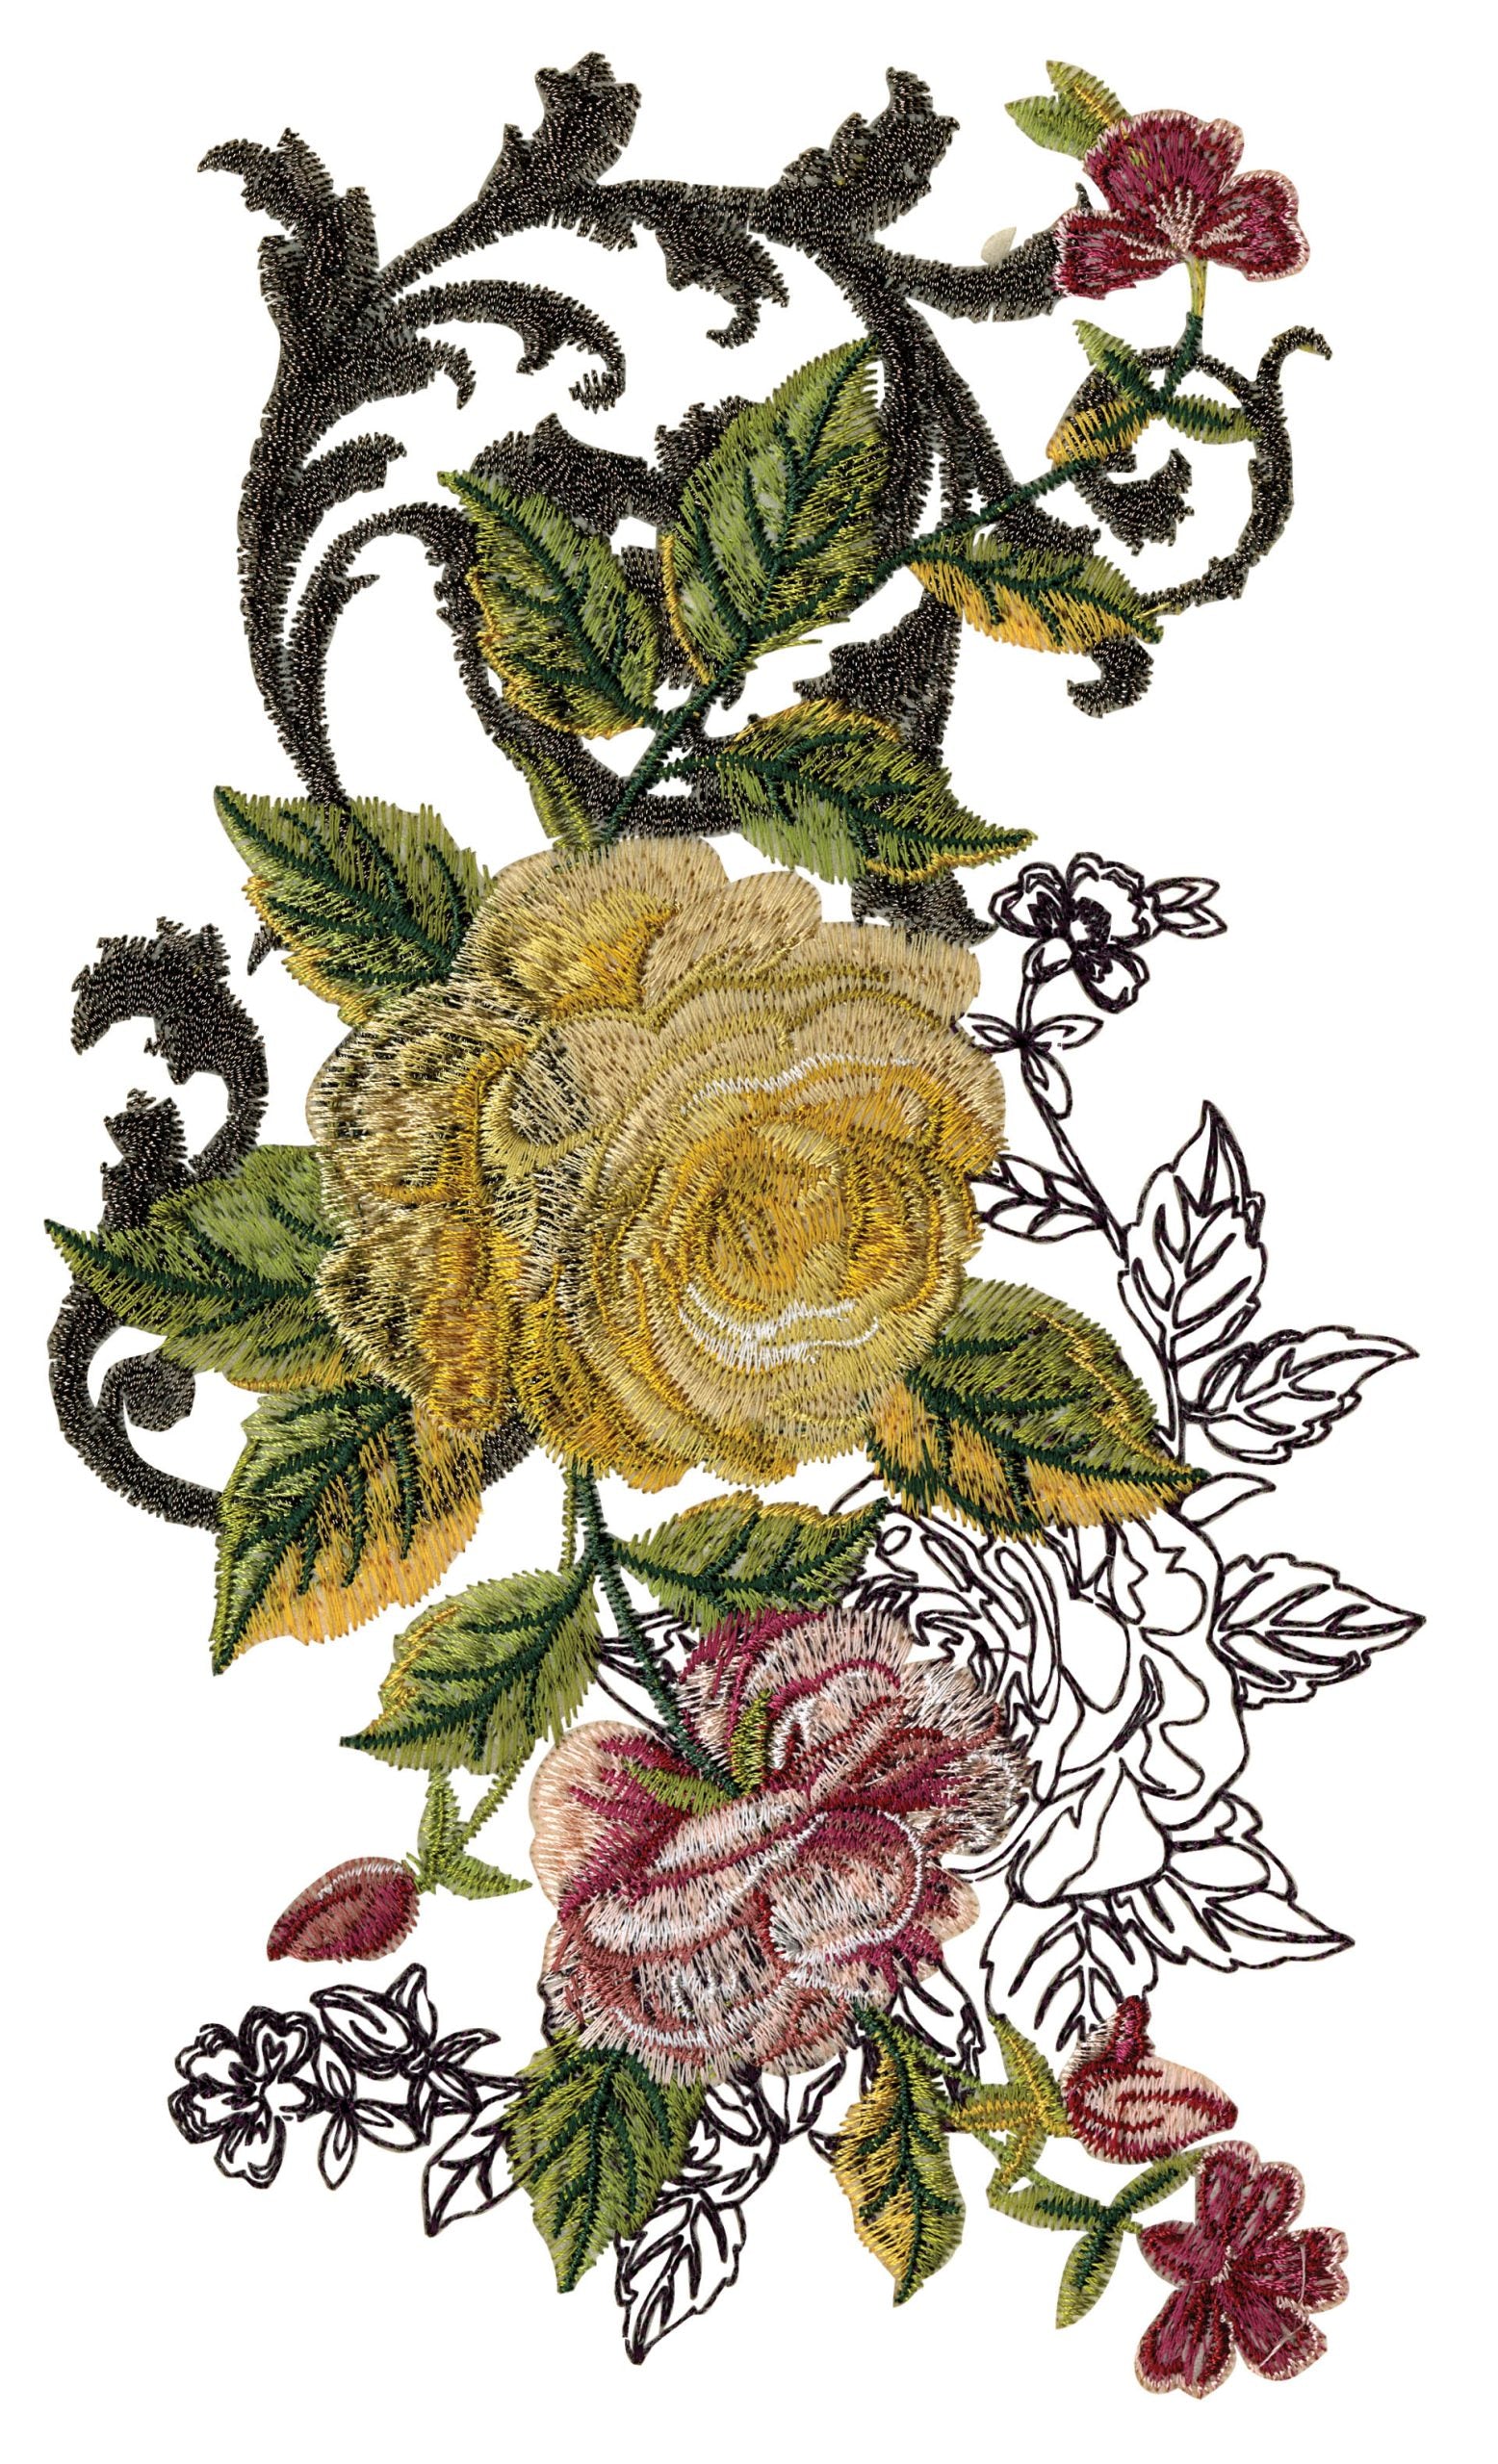 Machine Embroidery Designs - A Rose is a Rose Set